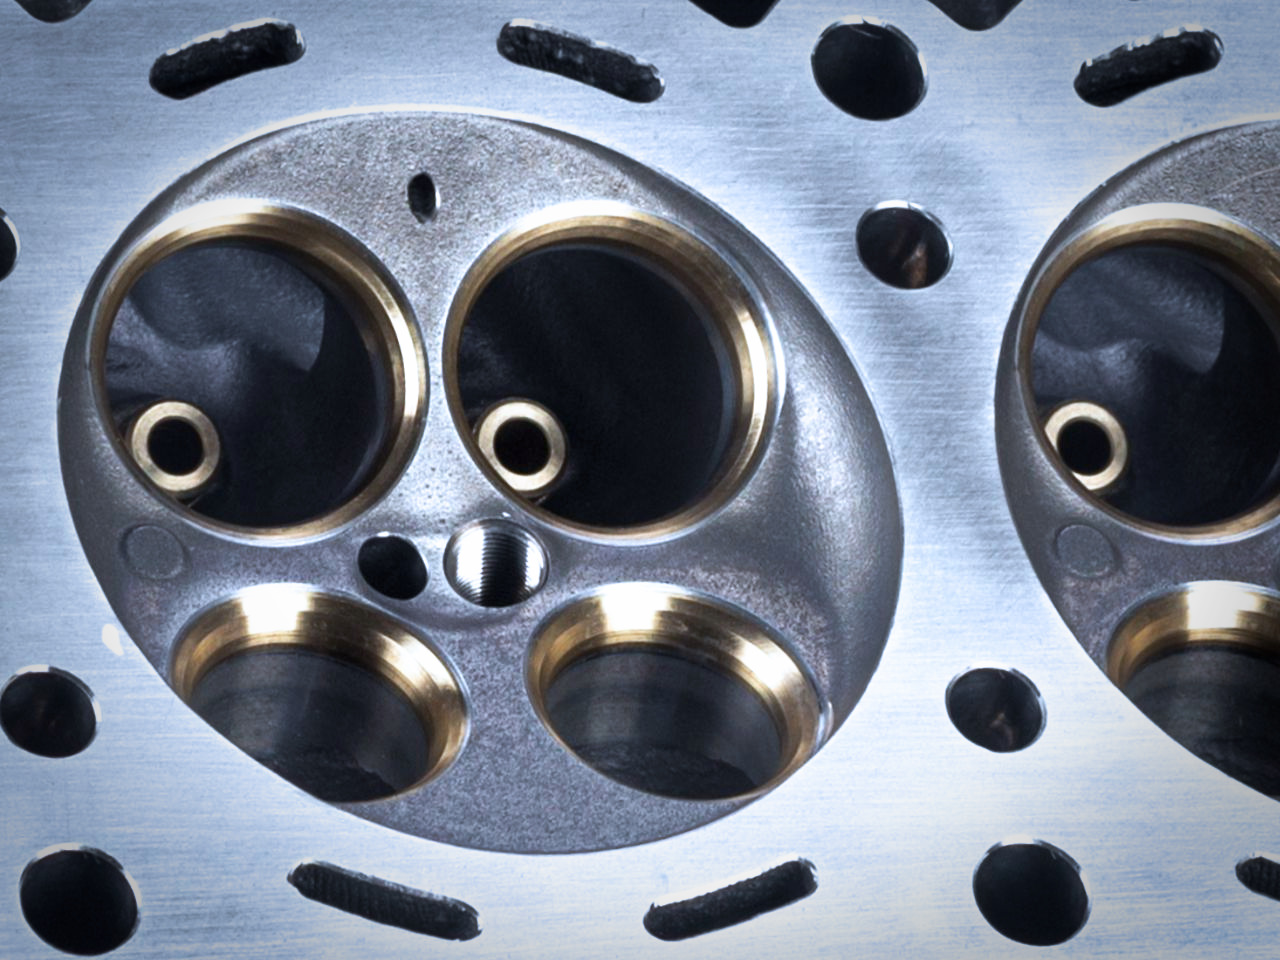 Inlet ports of a cylinder head